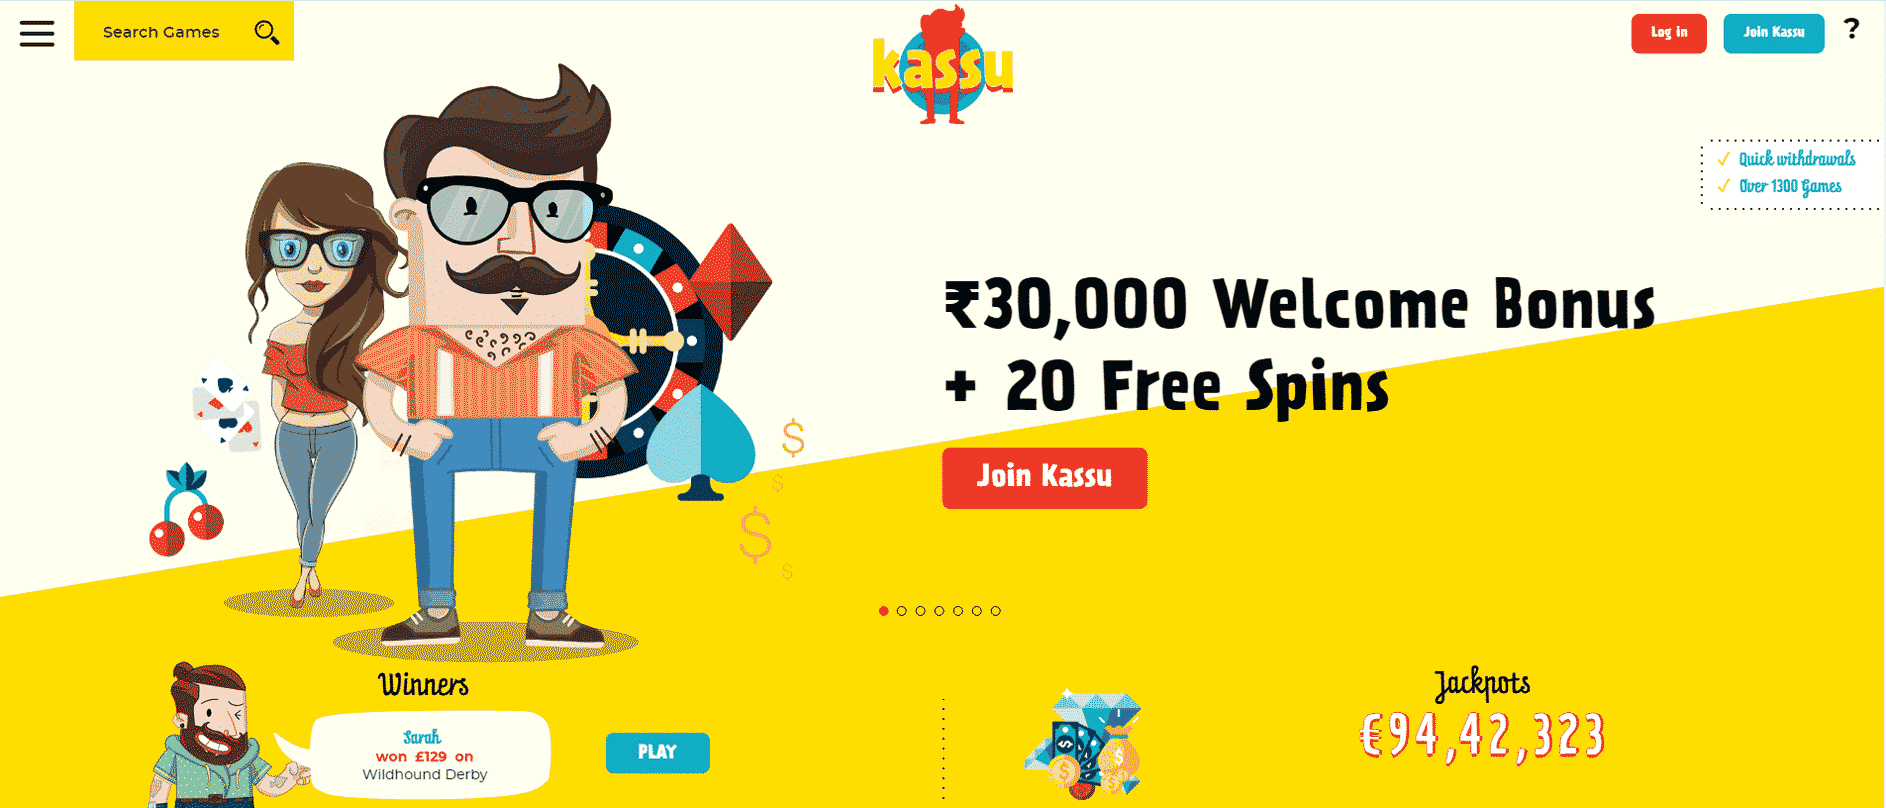 kassu casino review - hassle-free gaming with amazing offers